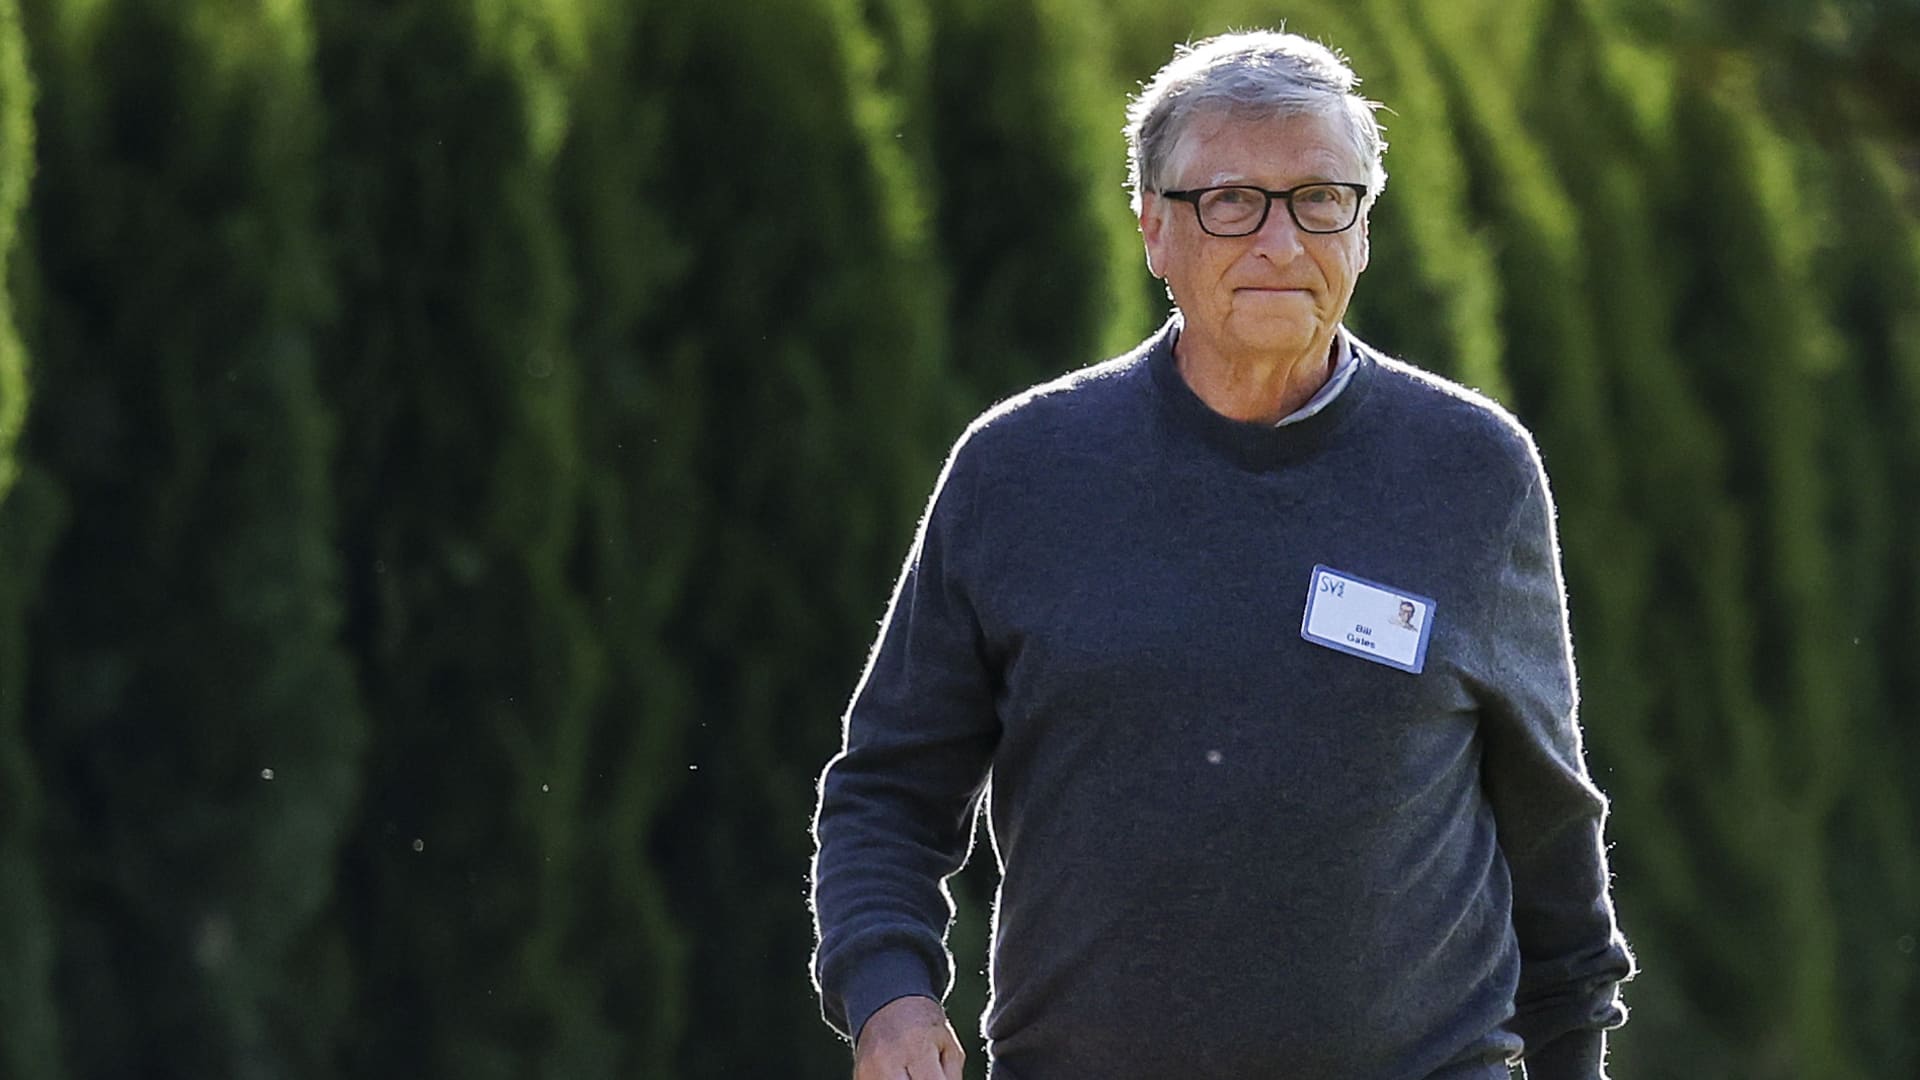 Bill Gates, co-founder of Microsoft and Chair of the Gates Foundation, walks to a morning session during the Allen & Company Sun Valley Conference on July 08, 2022 in Sun Valley, Idaho.